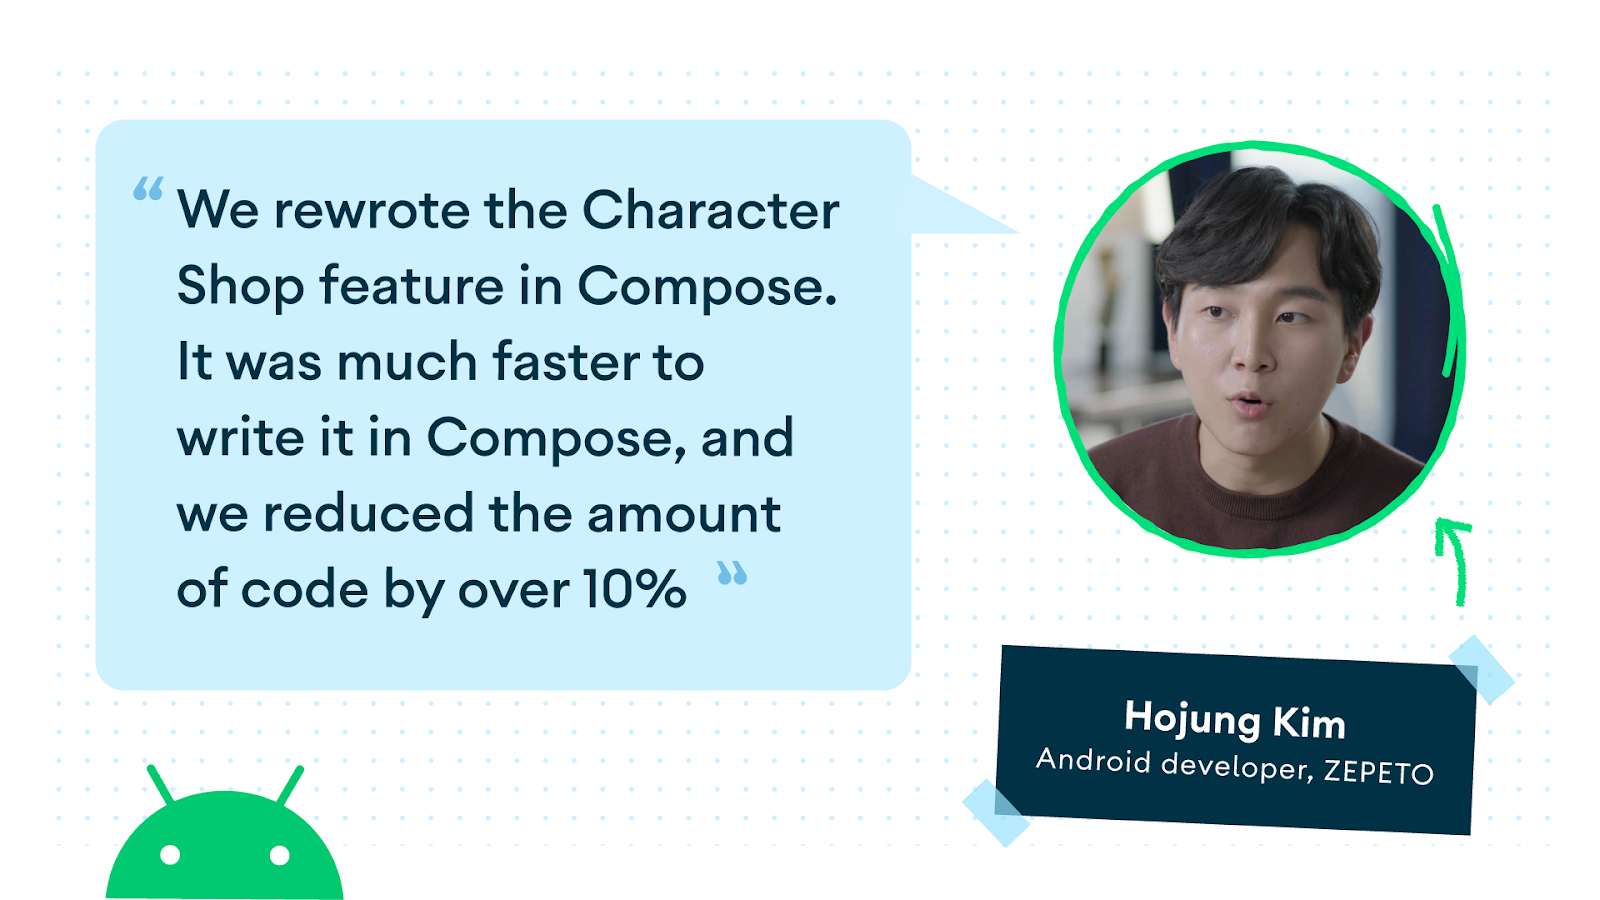 We rewrote the Character Shop feature in Compose. It was much faster to write it in Compose, and we reduced the amount of code by over 10% ≫
Hojung Kim Android developer, ZEPETO